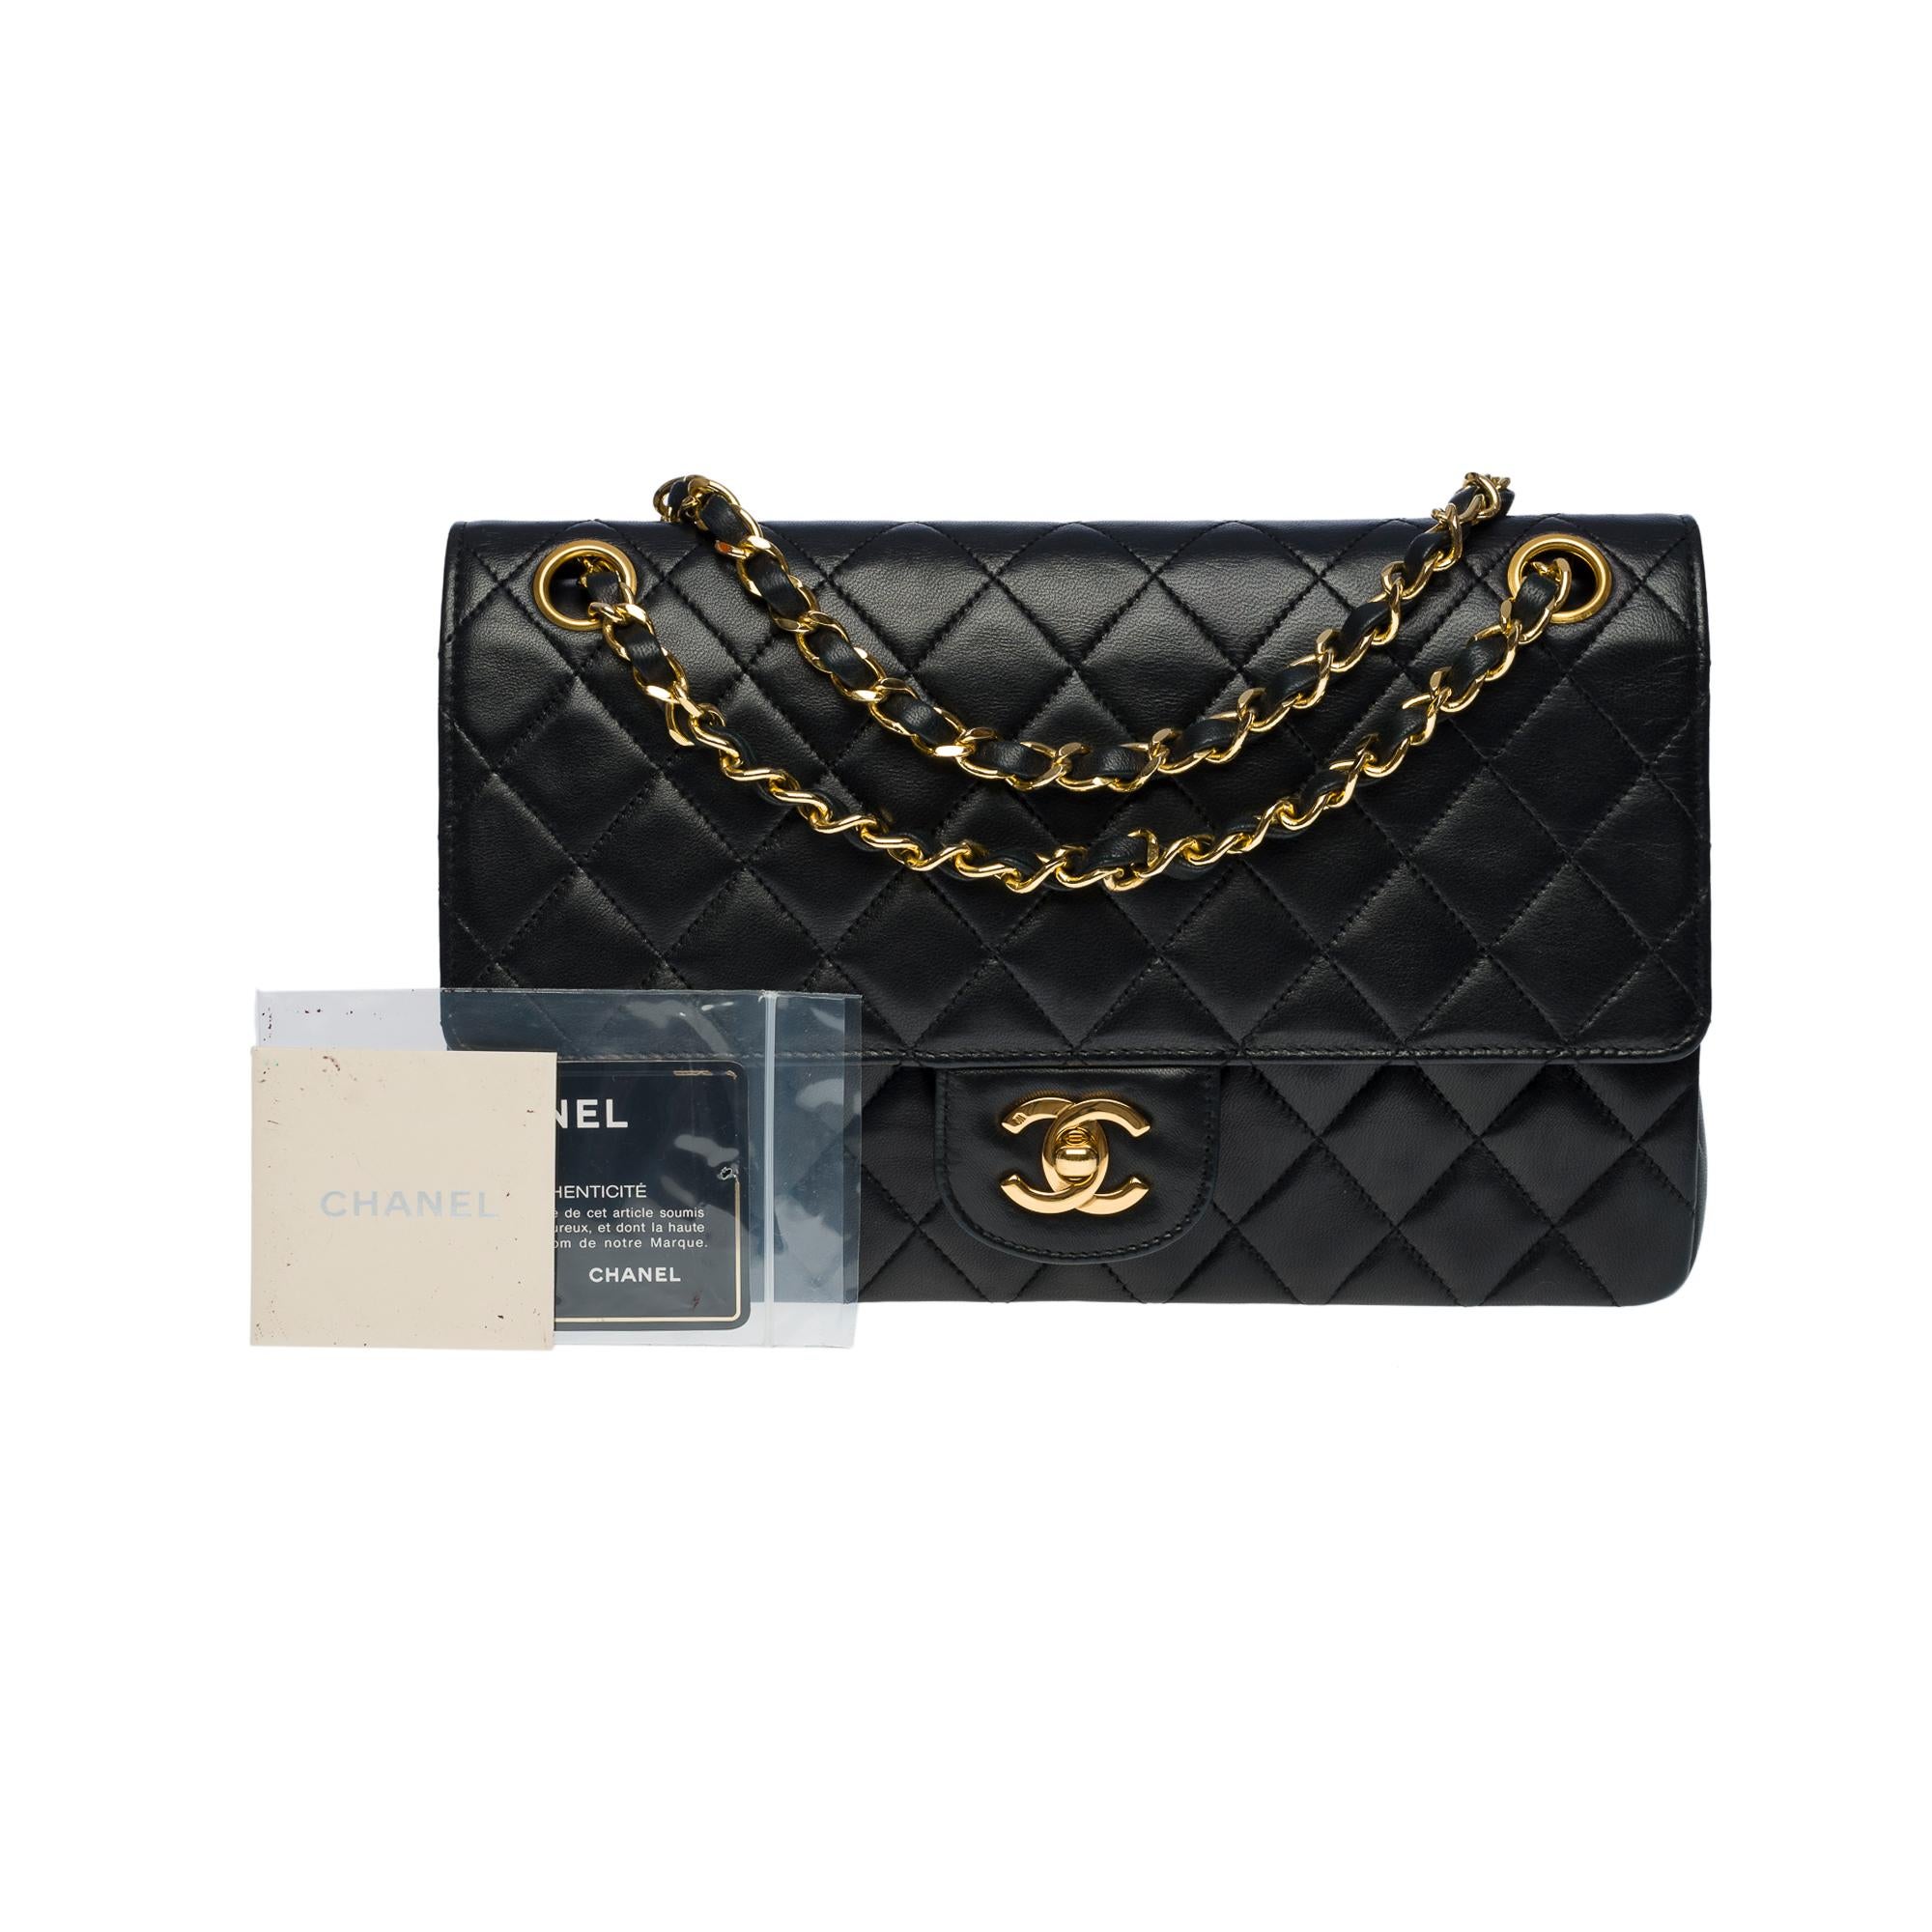 Chanel Medium Timeless double flap shoulder bag in black quilted lambskin, GHW 6